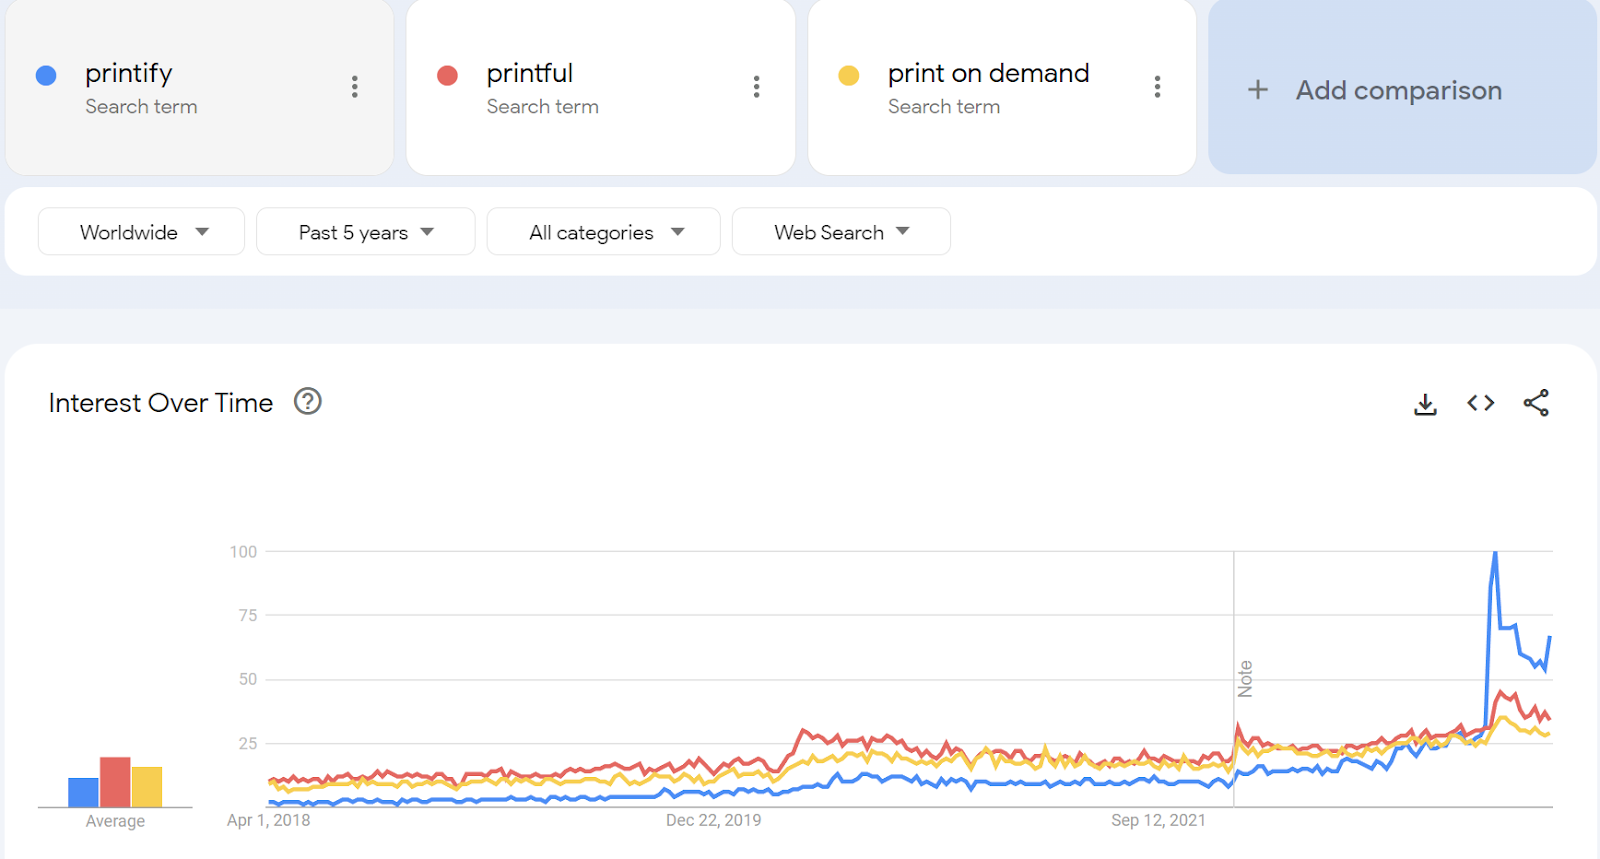 Google Trends chart comparing interest in the search terms Printify, Printful, and print on demand